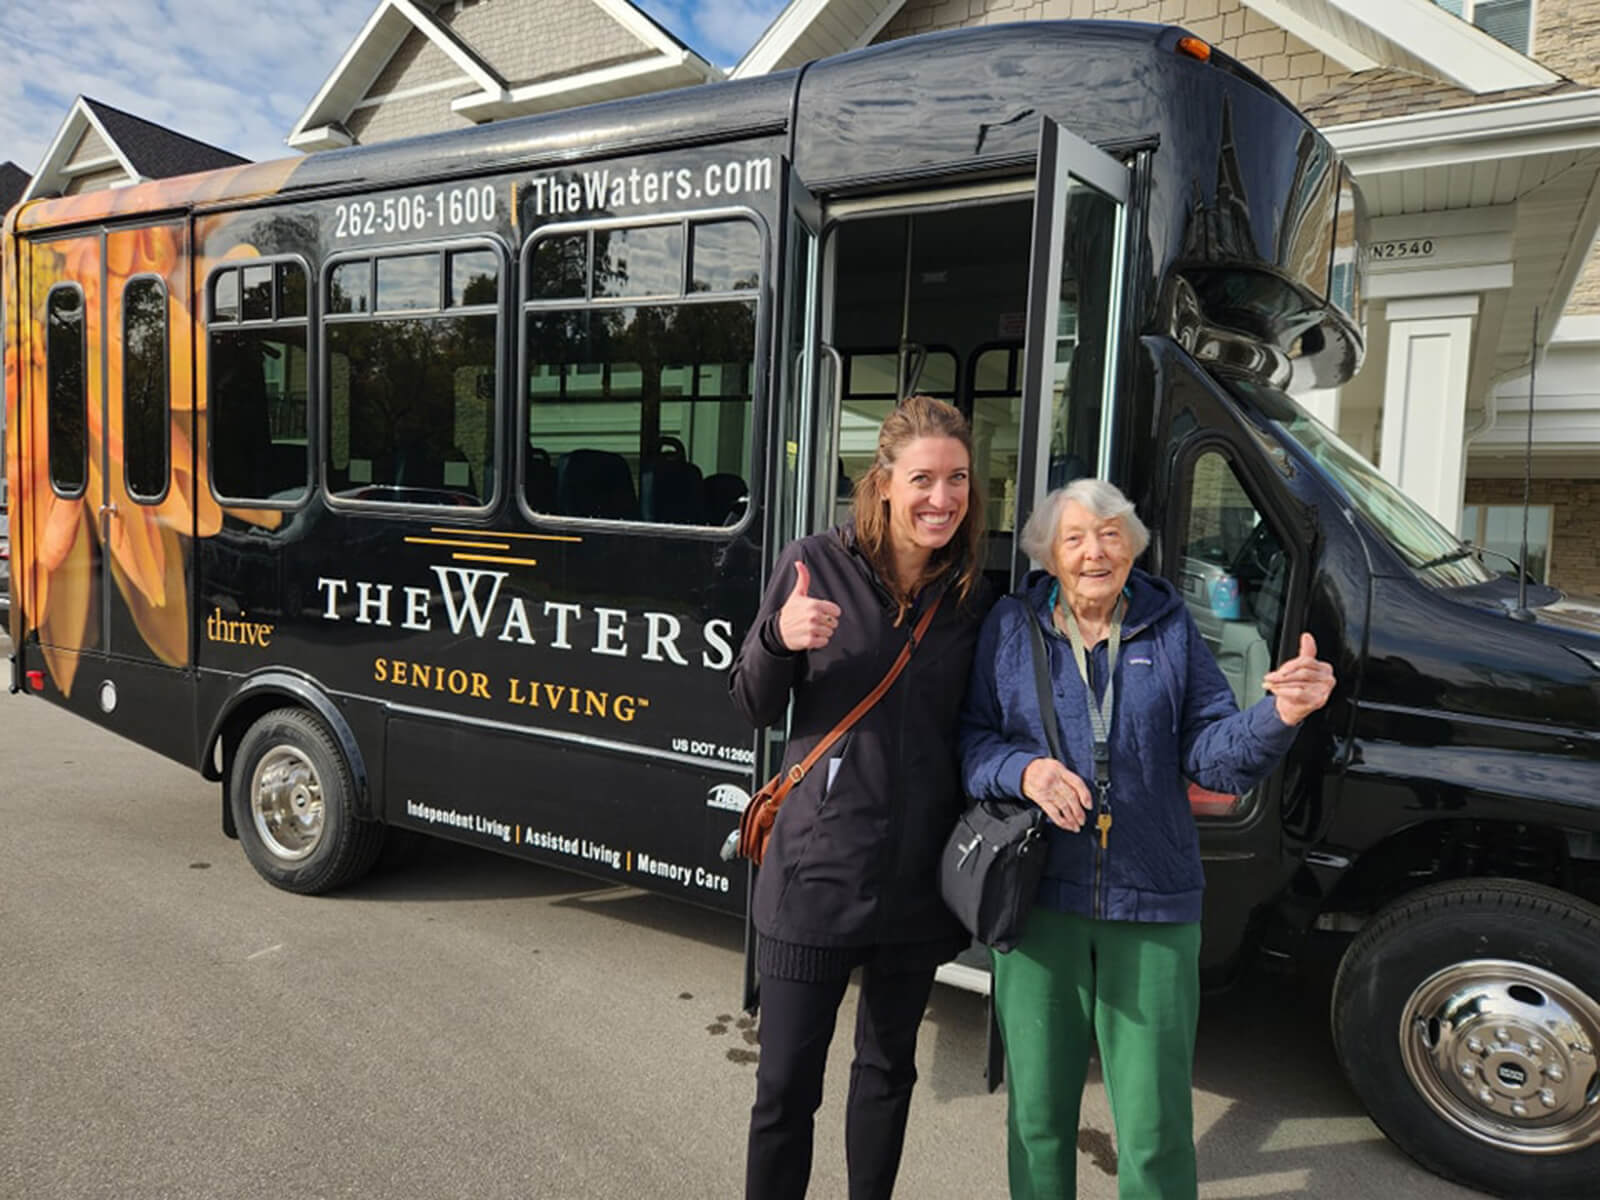 A joyful senior resident ready for an outing, standing beside The Waters of Pewaukee community bus, symbolizing active senior living.